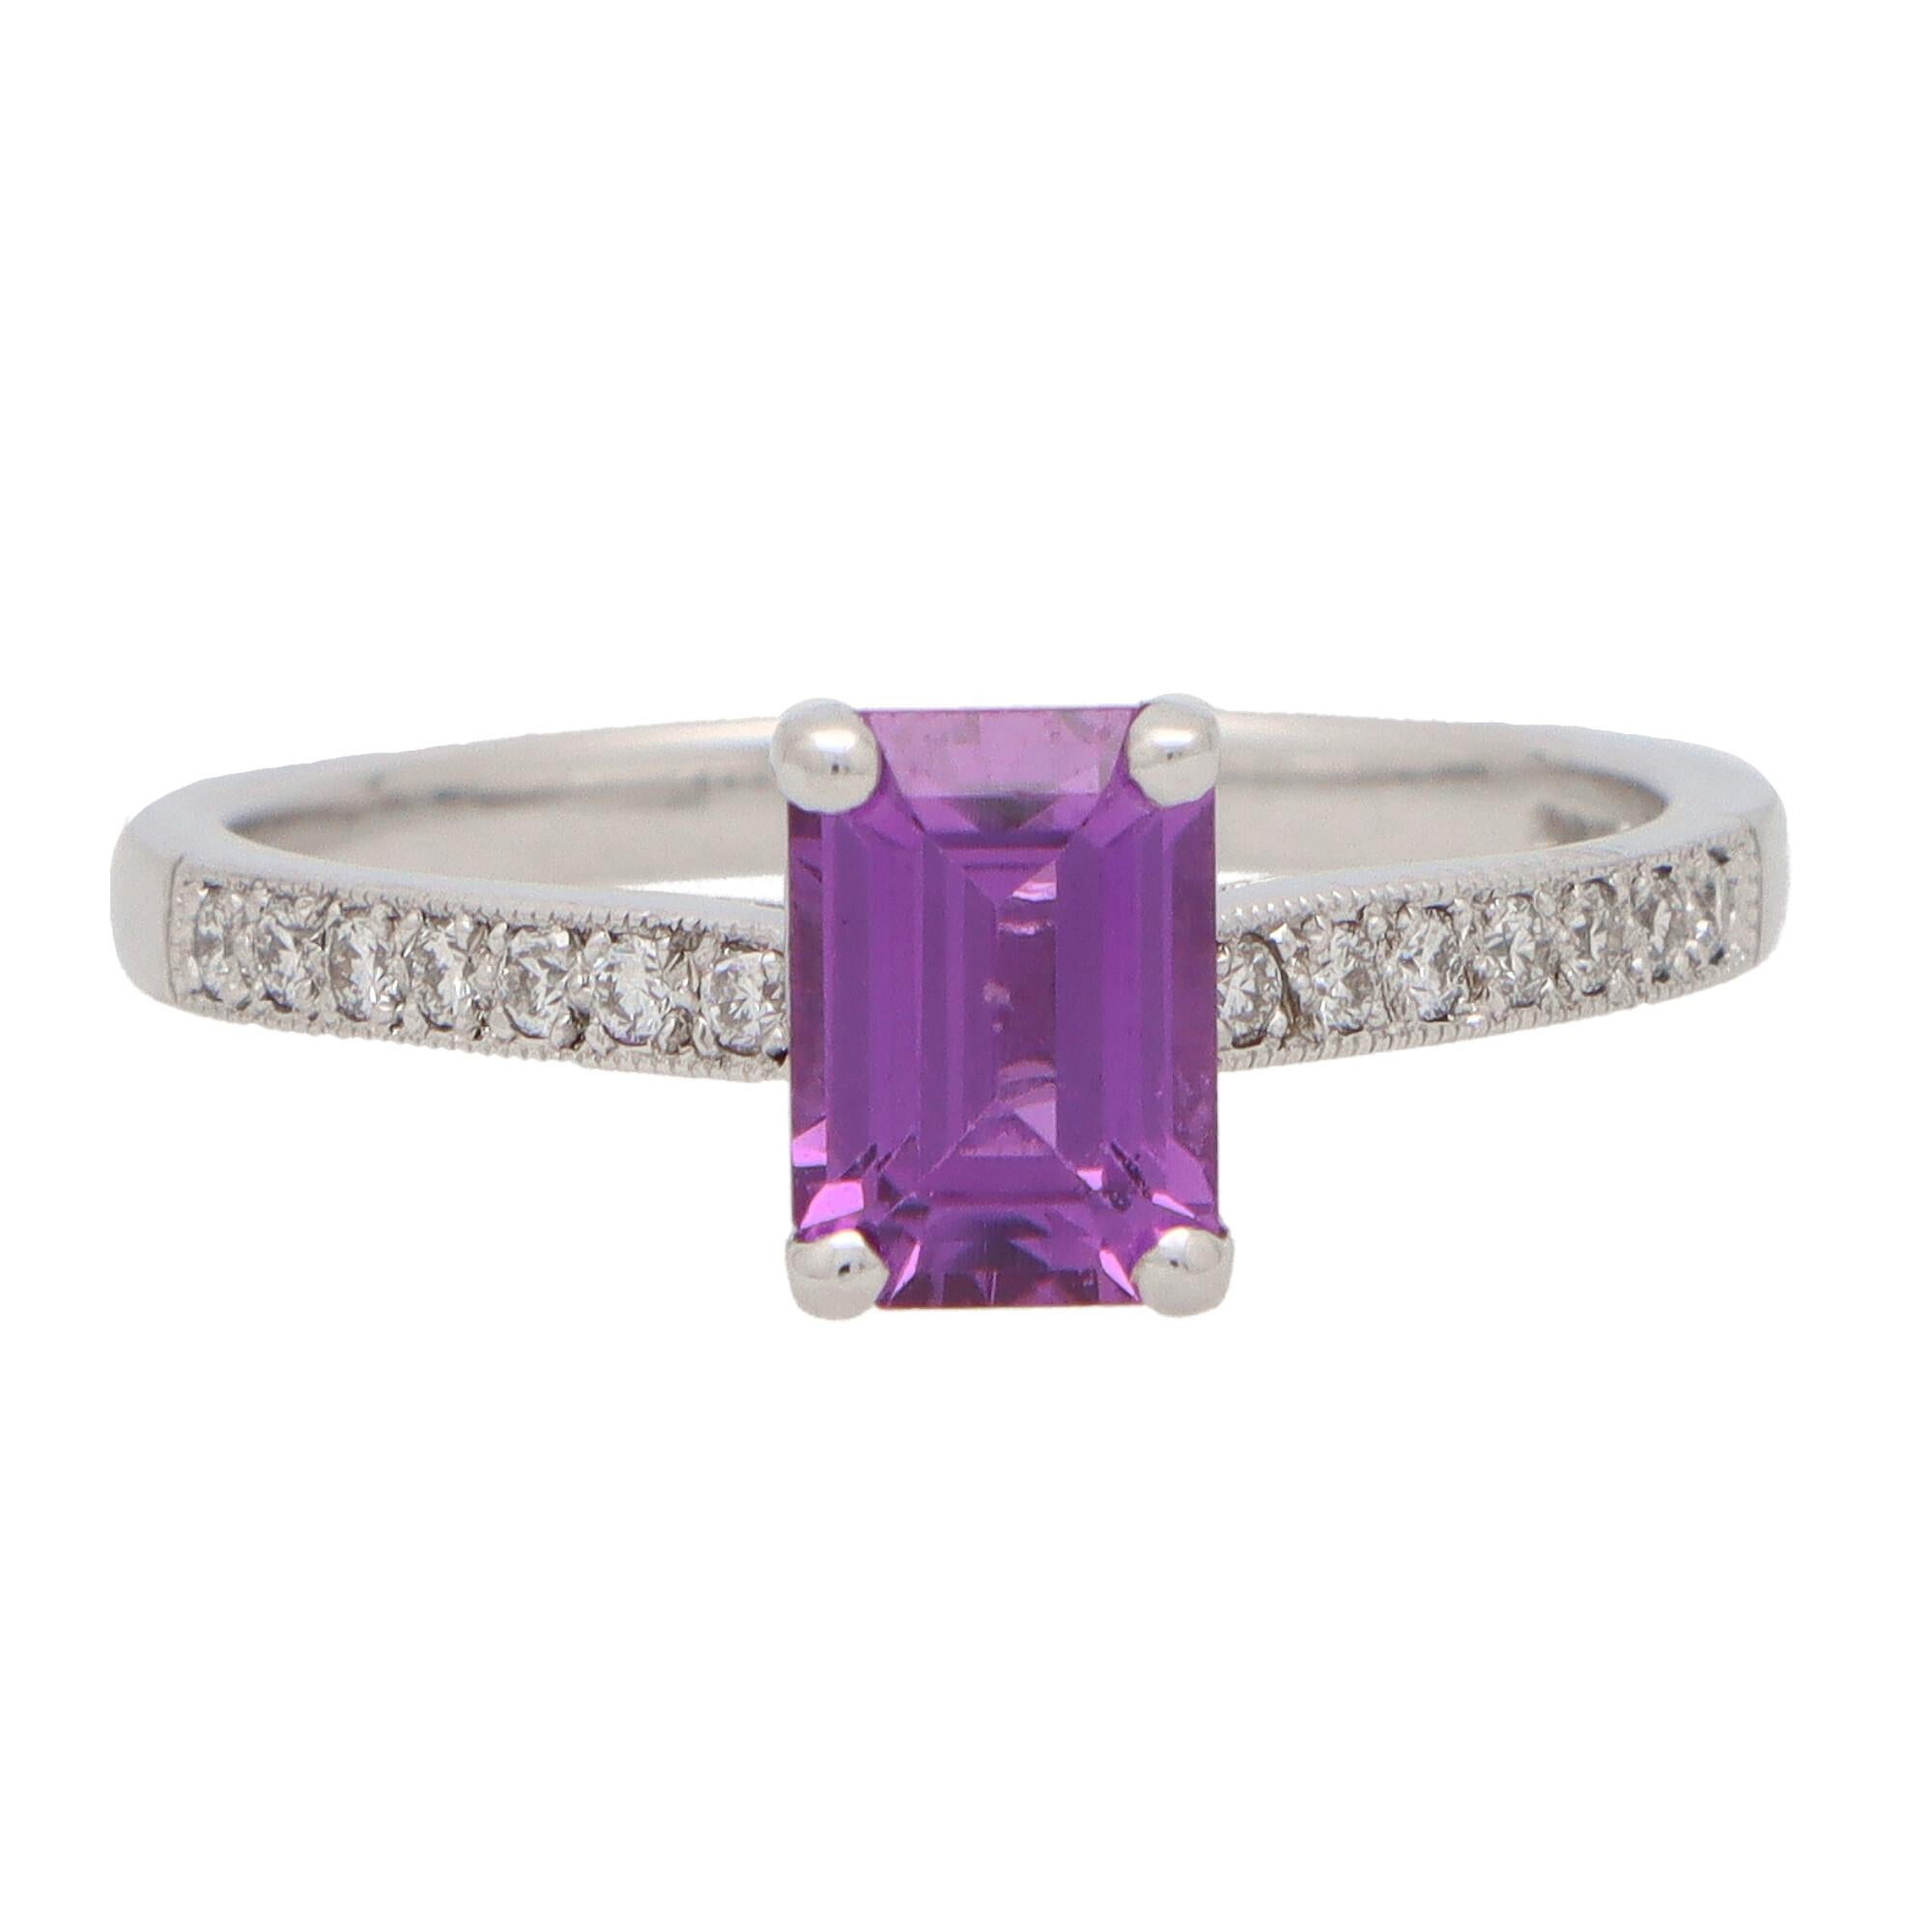 Modern Purple Sapphire and Diamond Solitaire Ring Set in 18k White Gold